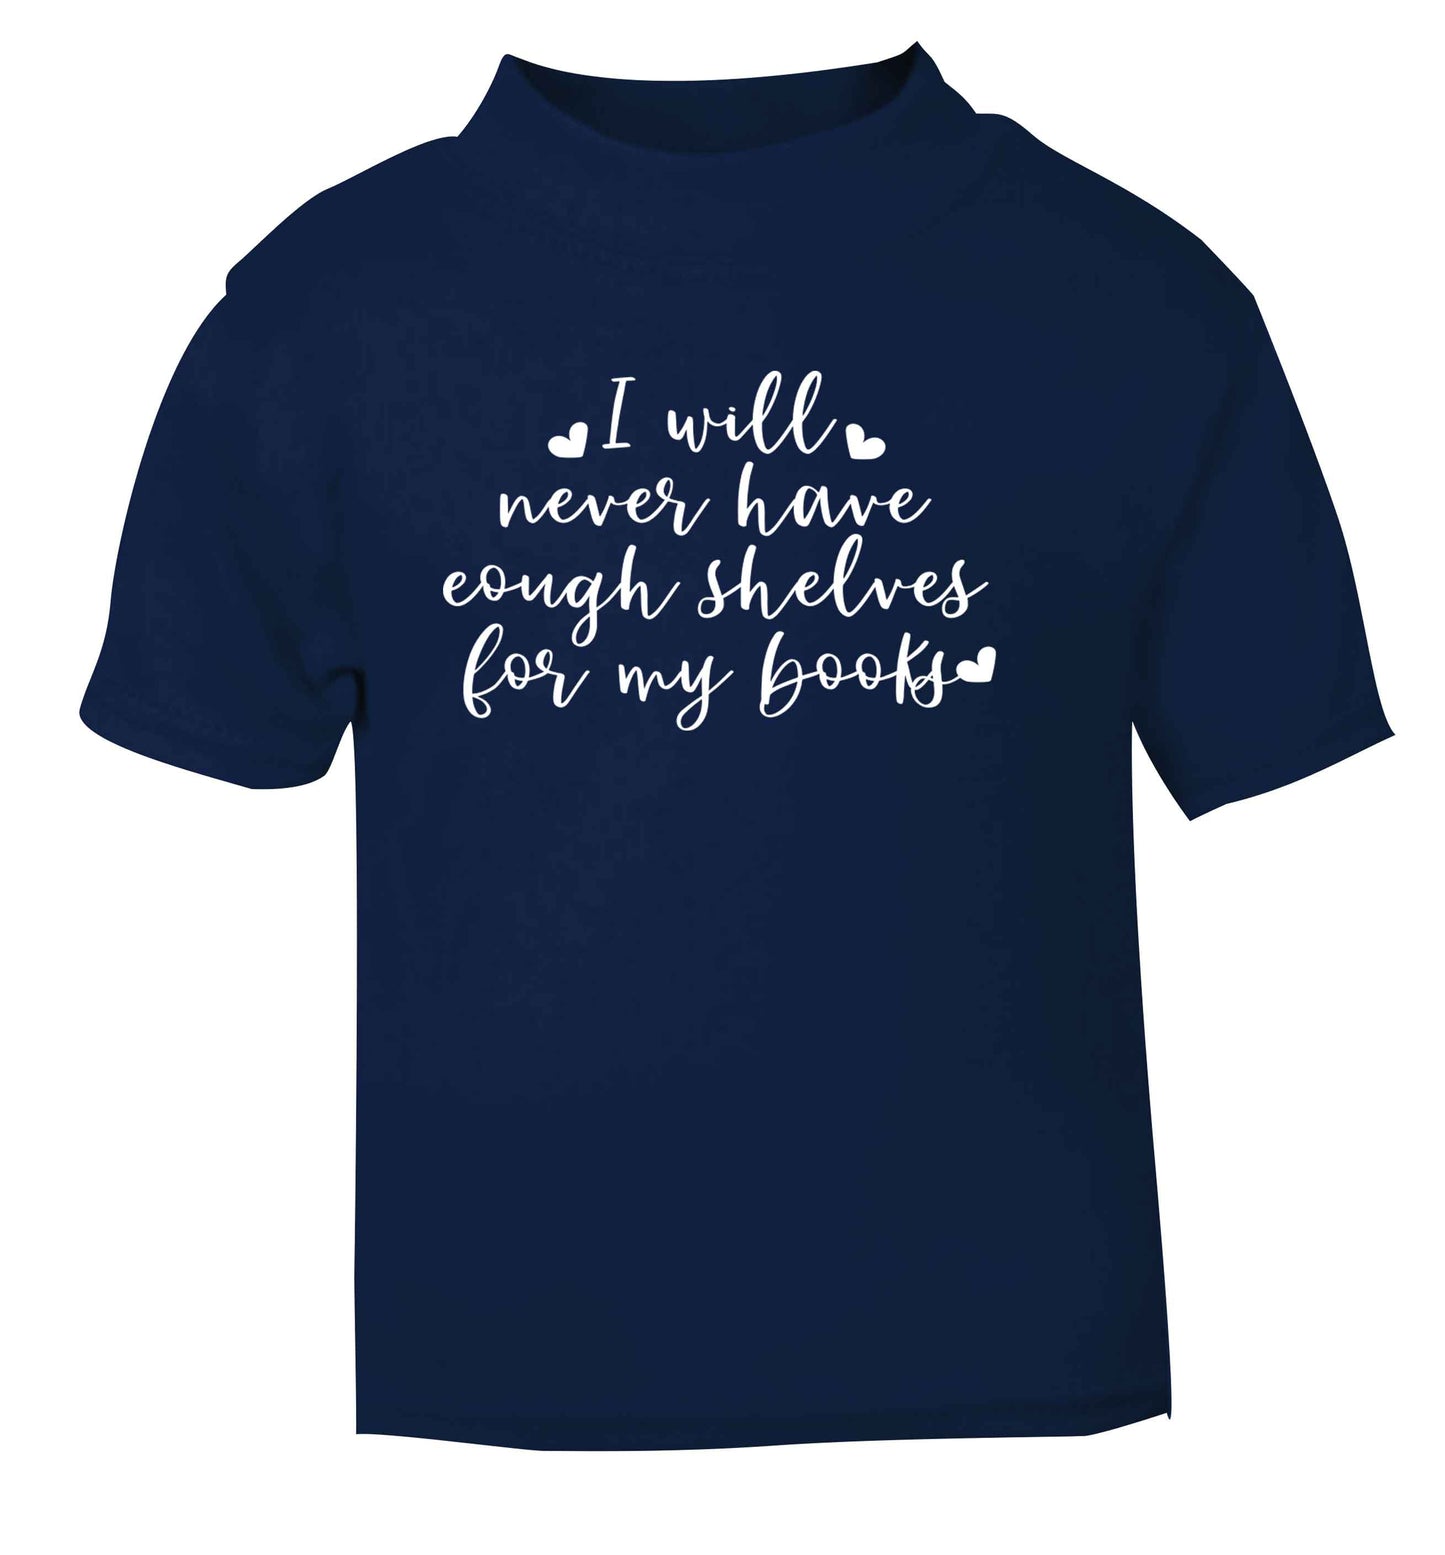 I will never have enough shelves for my books navy Baby Toddler Tshirt 2 Years